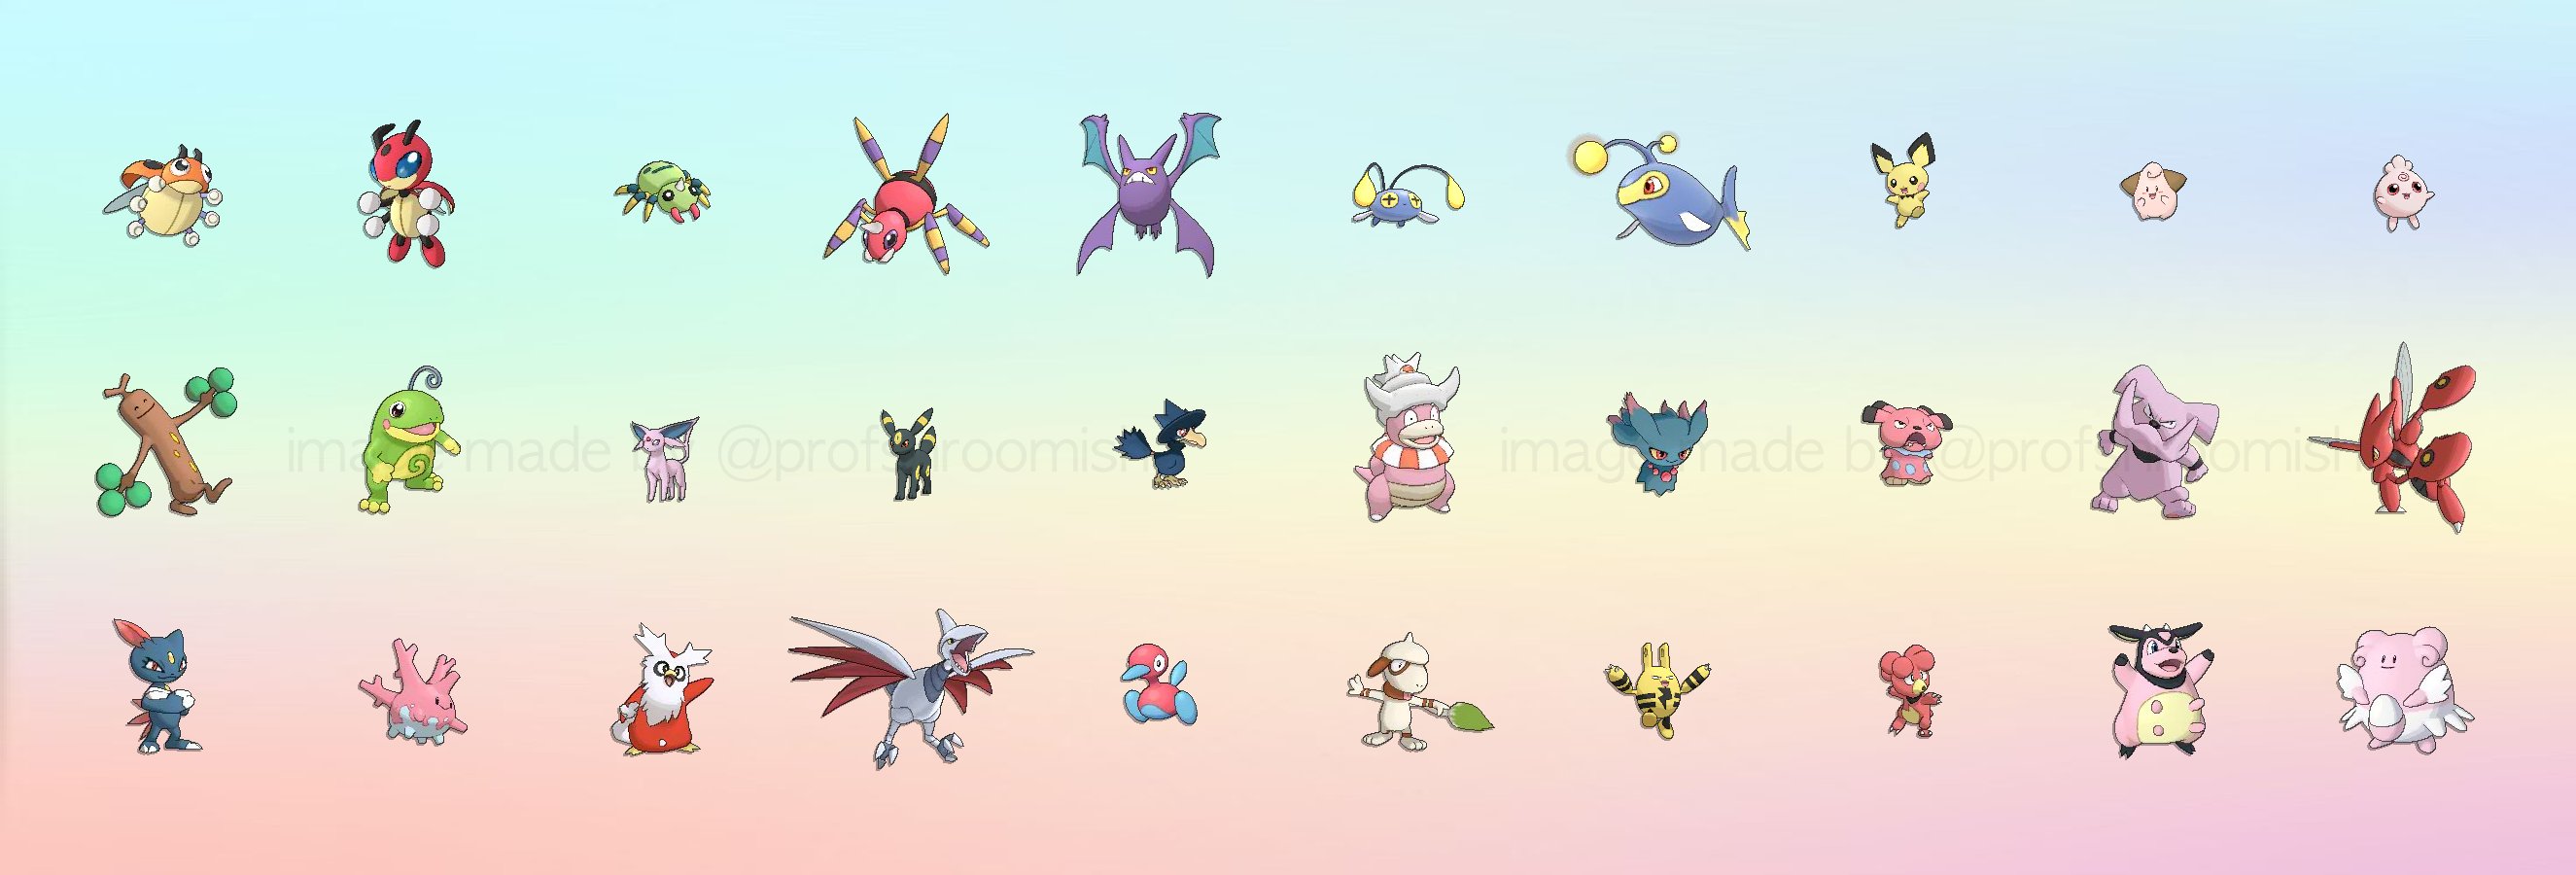 poop — yamiarts: All Alola pokedex made in this moment